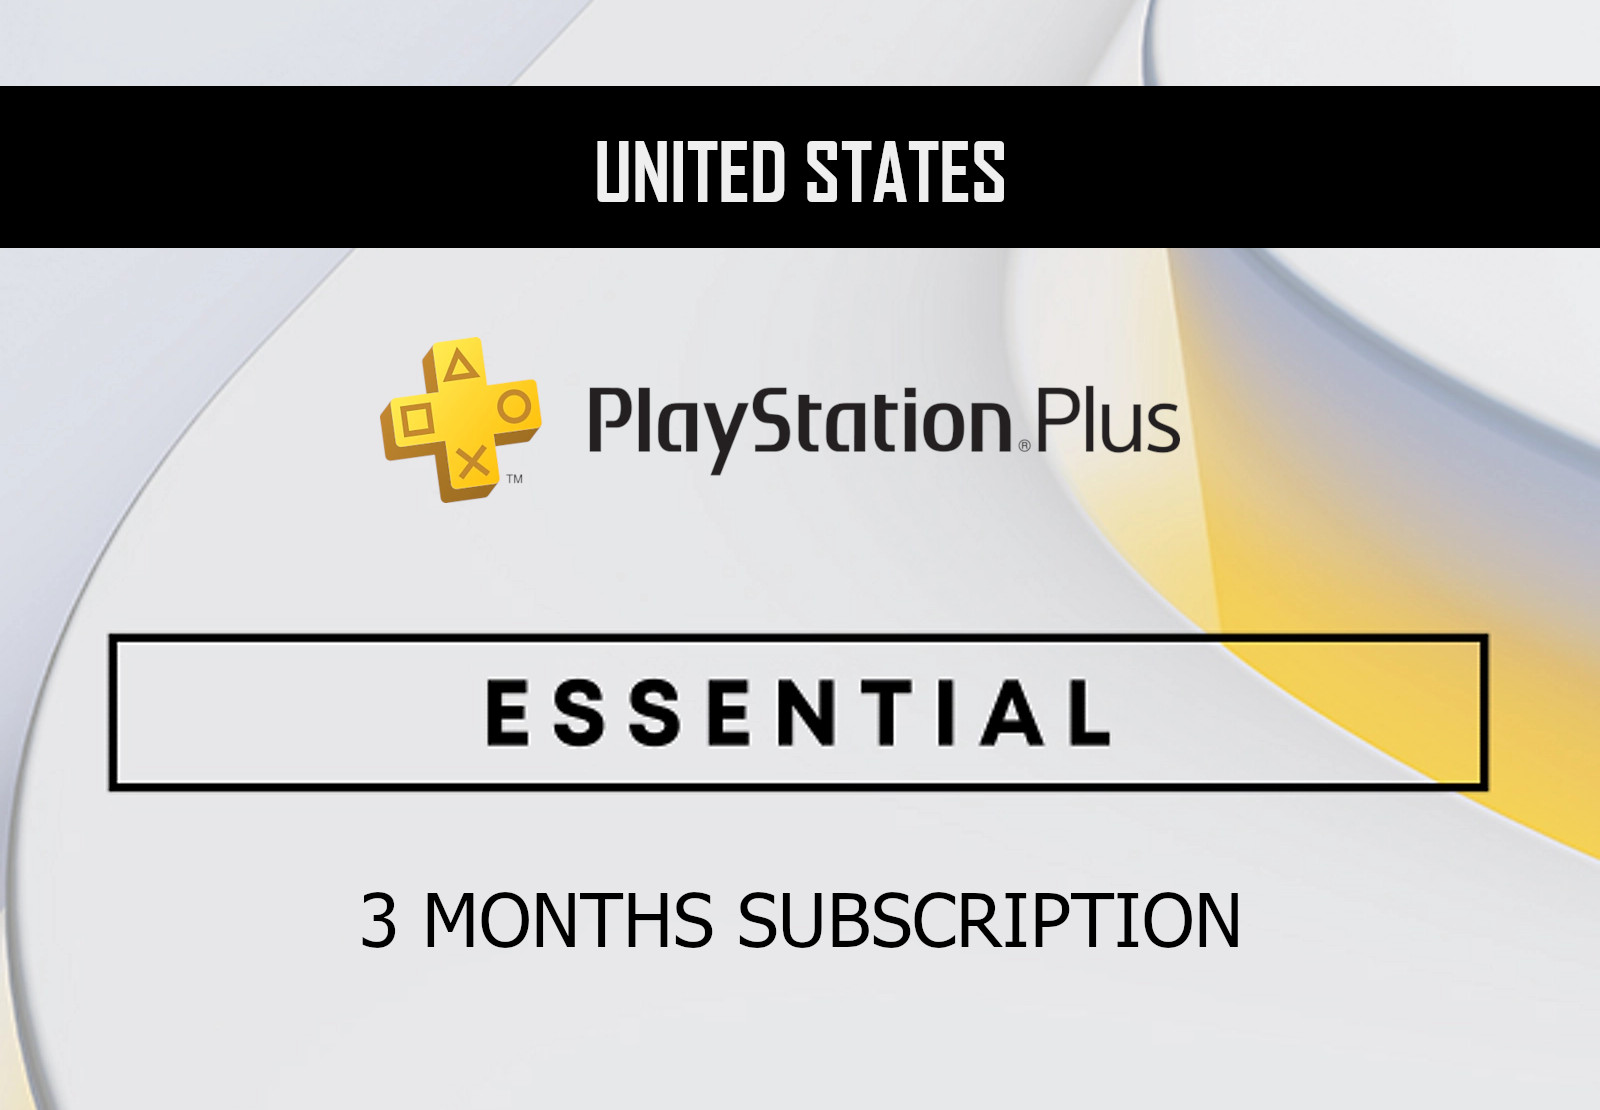 PlayStation Plus Extra 3 Months US